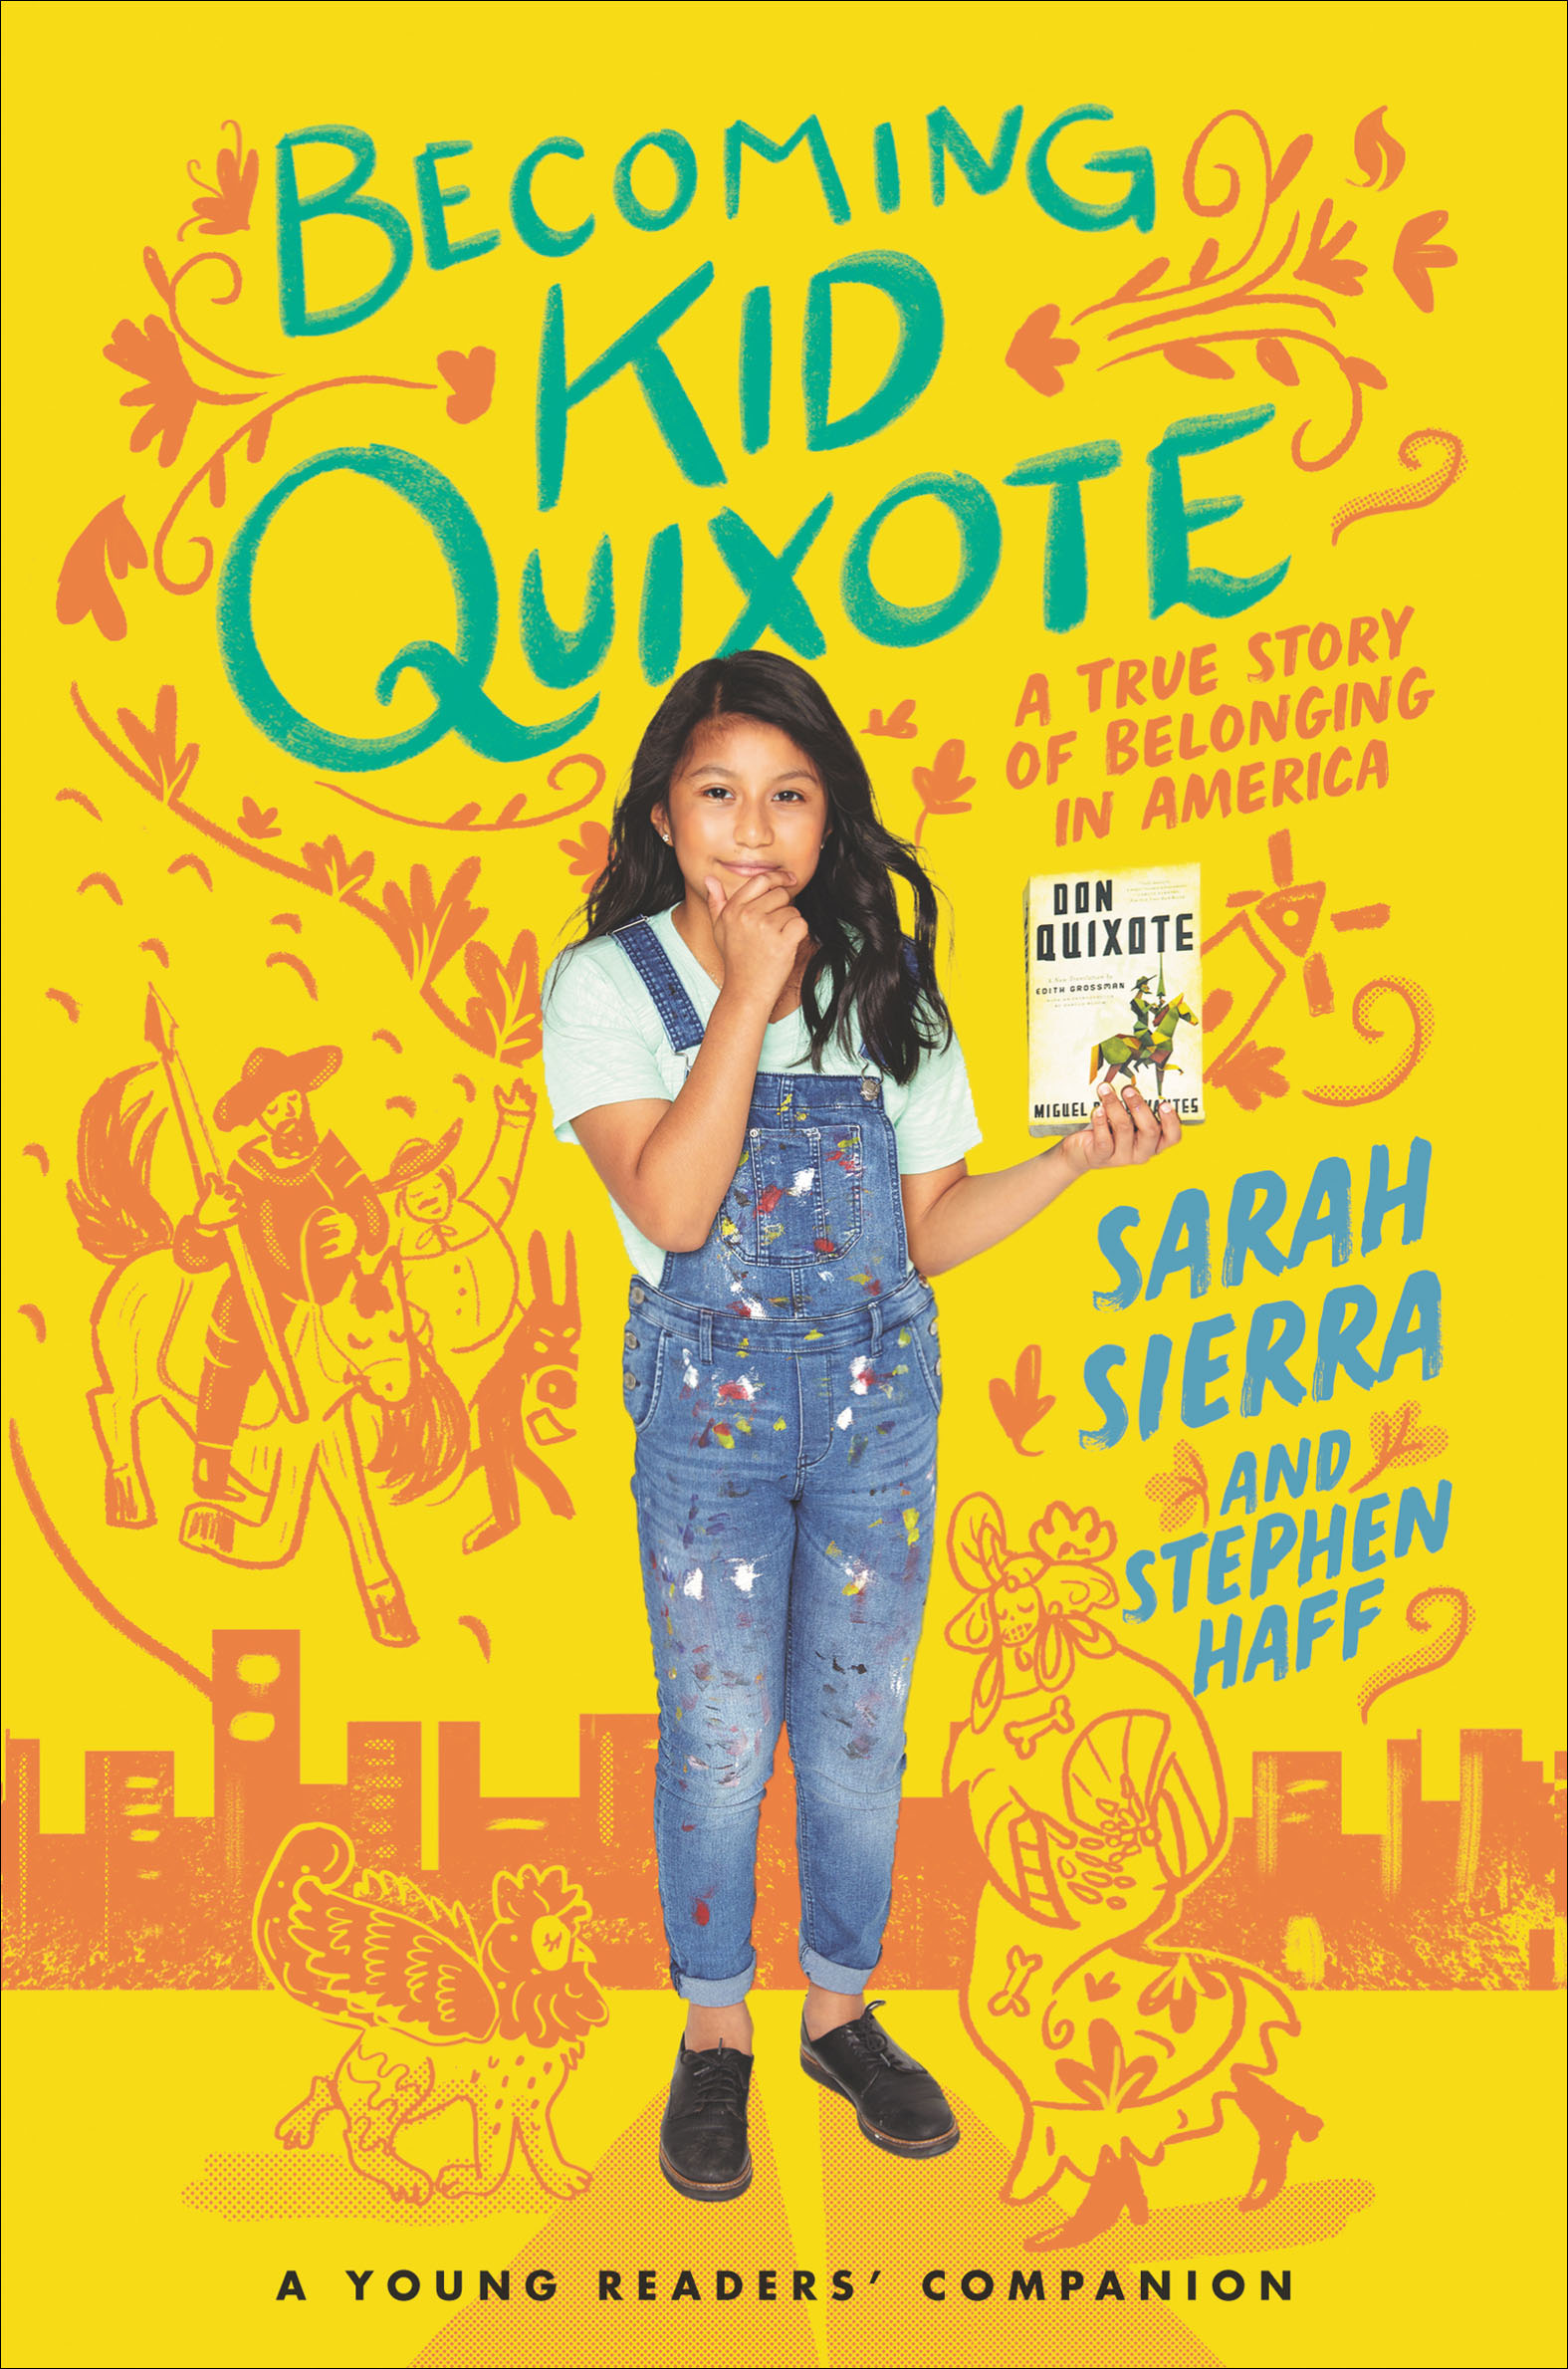 Becoming Kid Quixote A True Story of Belonging in America cover image